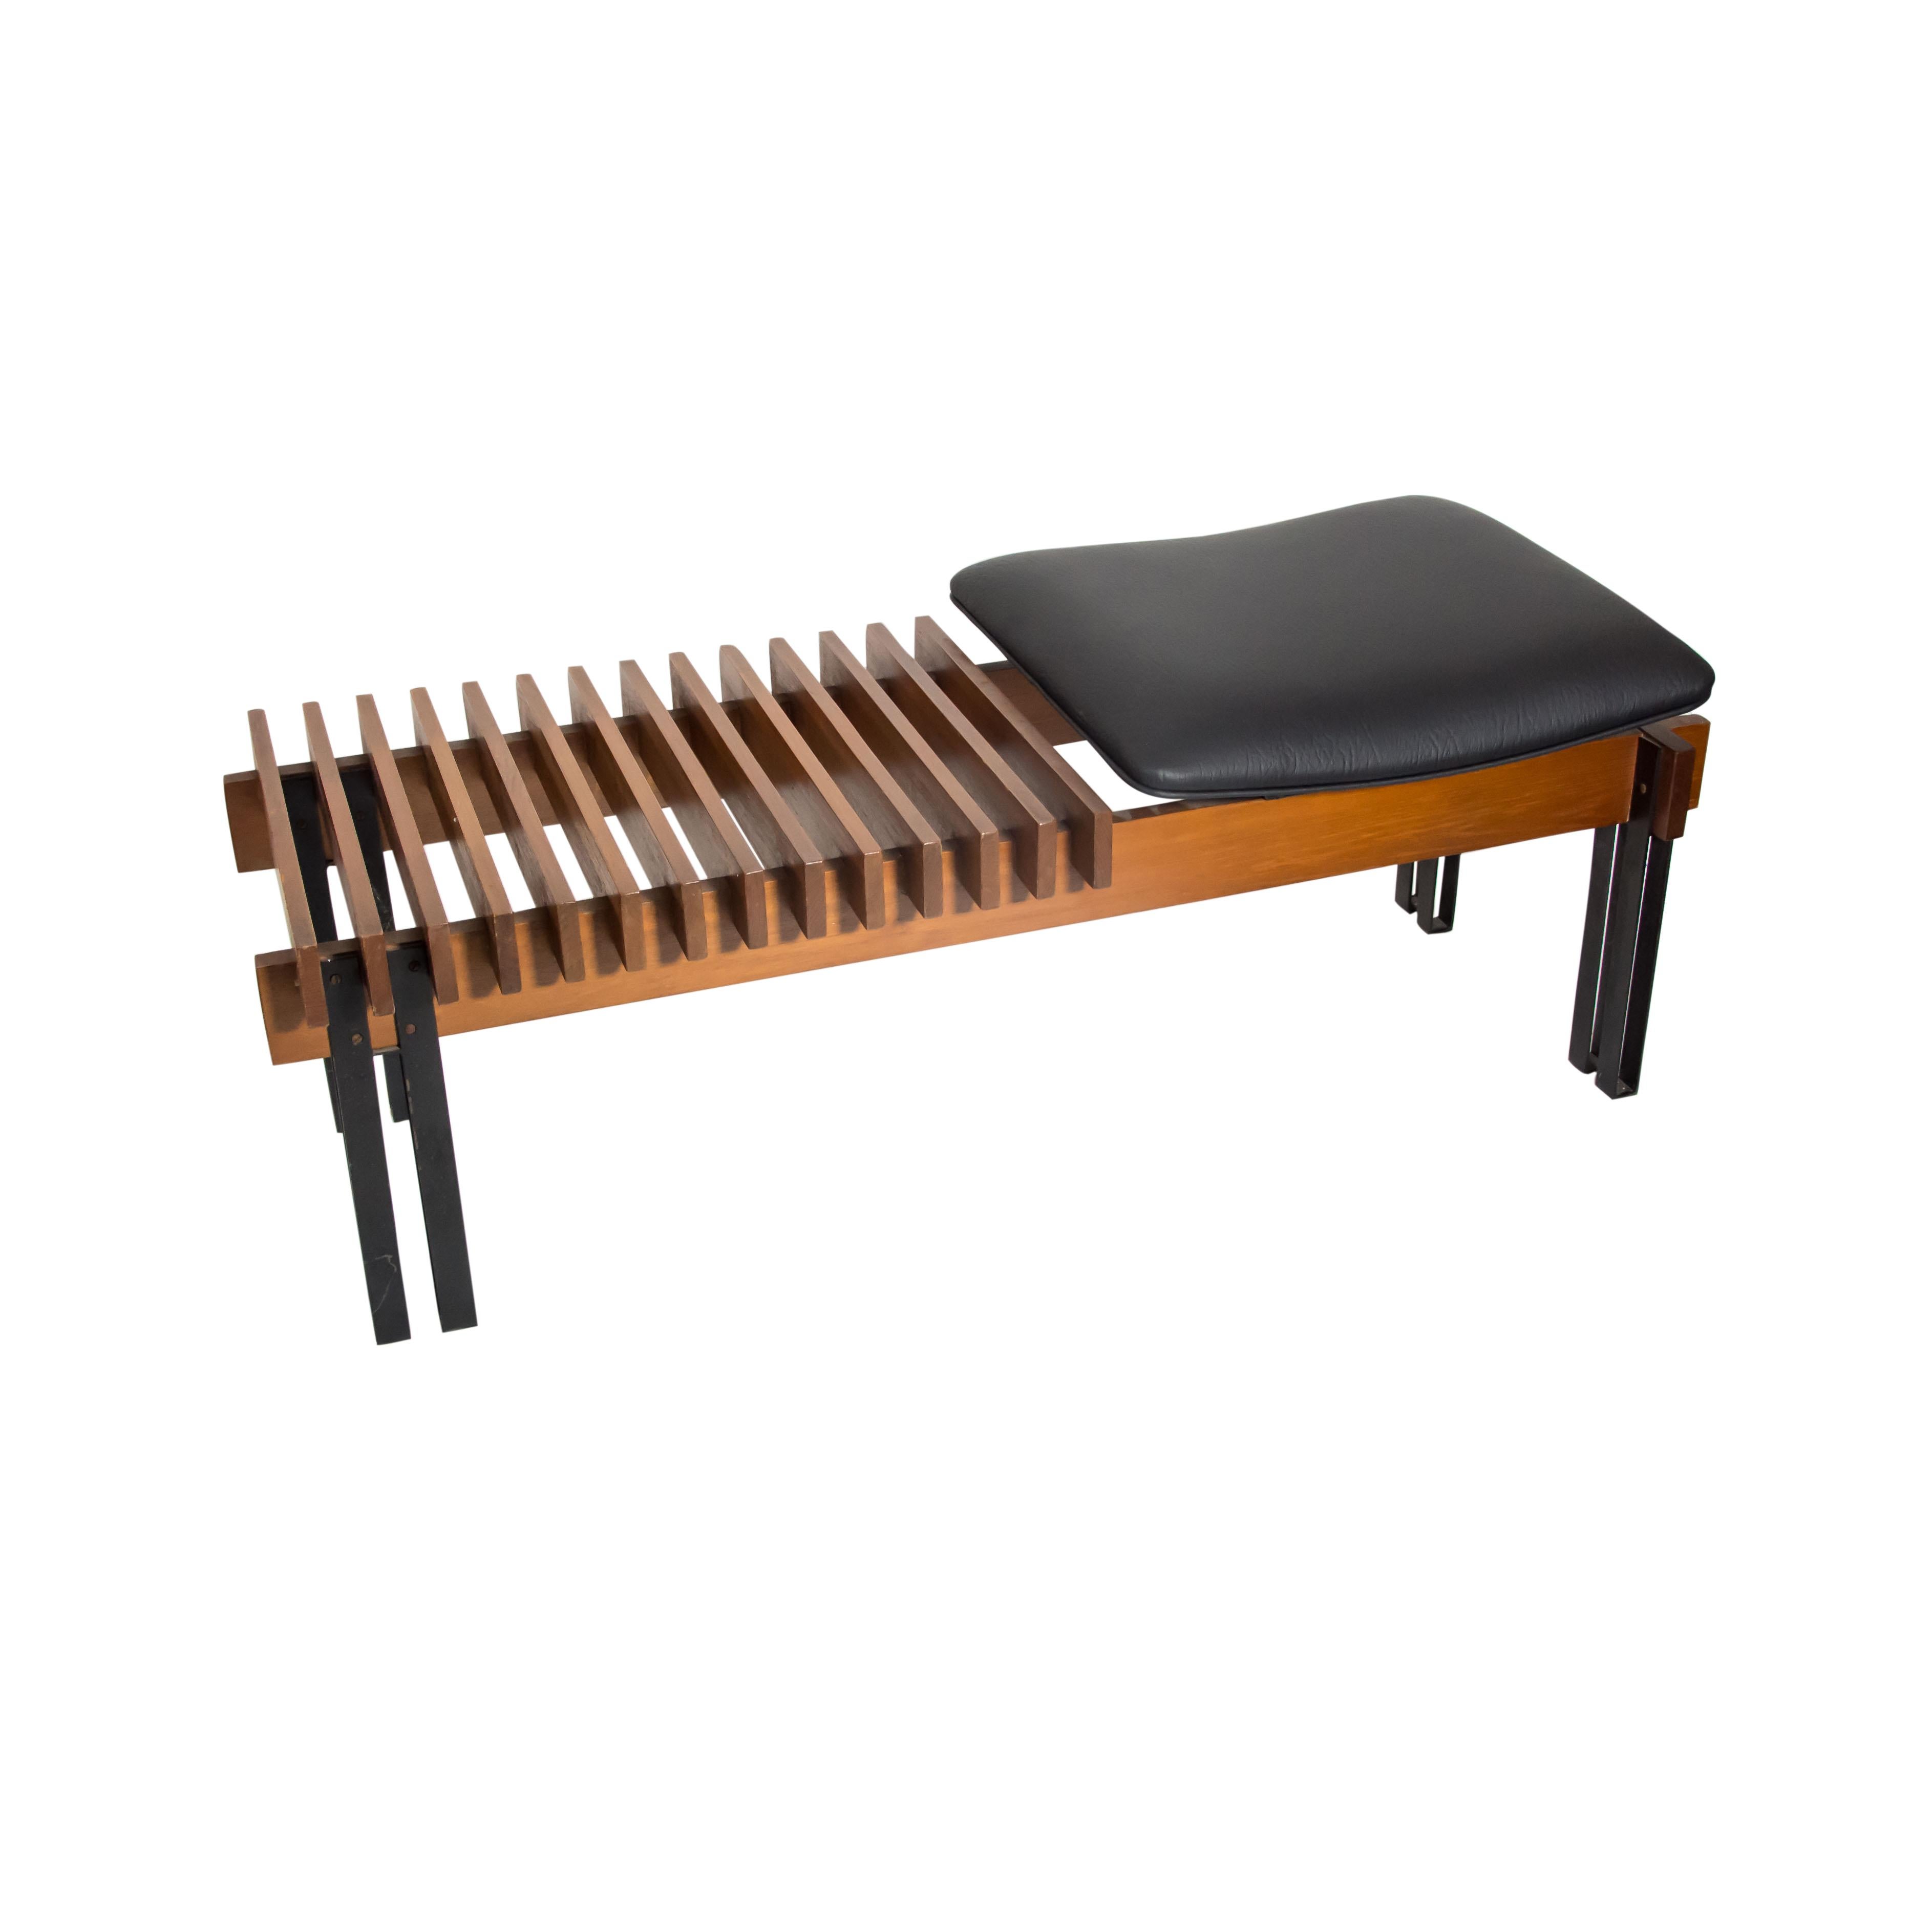 An outstanding pure Modernist bench, two tones of darker and lighter wood frame cleverly built up with a black leather upholstered seat, black enamelled metal feet, Italian design by Inge and Luciano Rubino circa 1960s Made in Italy
Very iconic and